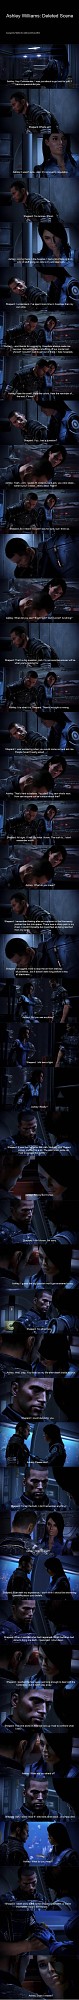 Apperently a deleated scene about Shepard's death